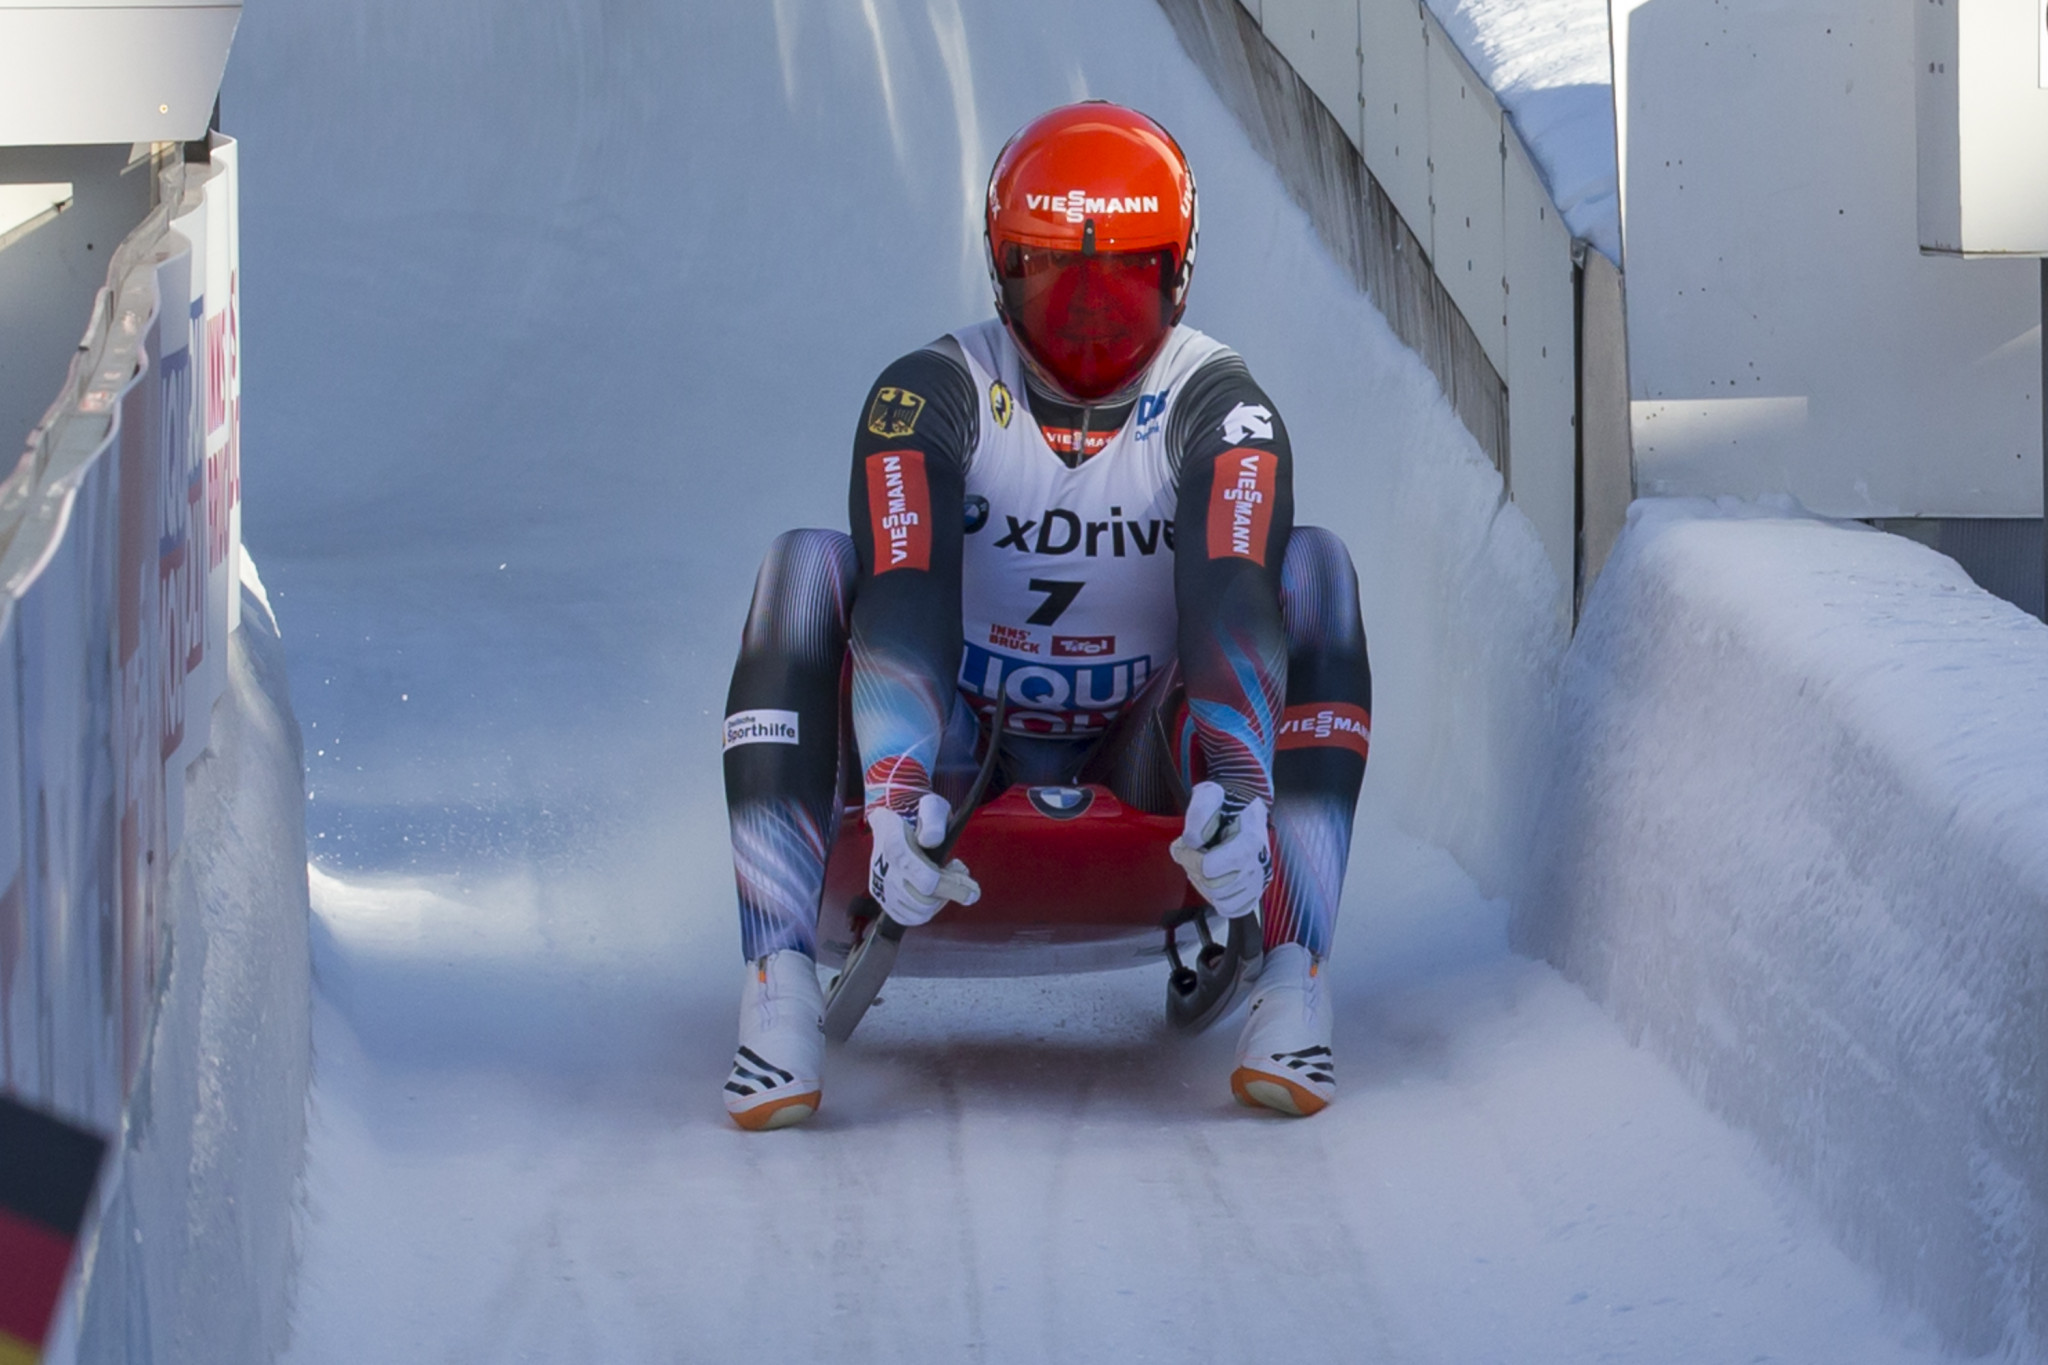 German duo Felix Loch and Natalie Geisenberger will both take a giant step towards sealing the overall Luge World Cup title in the men's and women's events respectively if they can secure victory in Lillehammer ©Getty Images